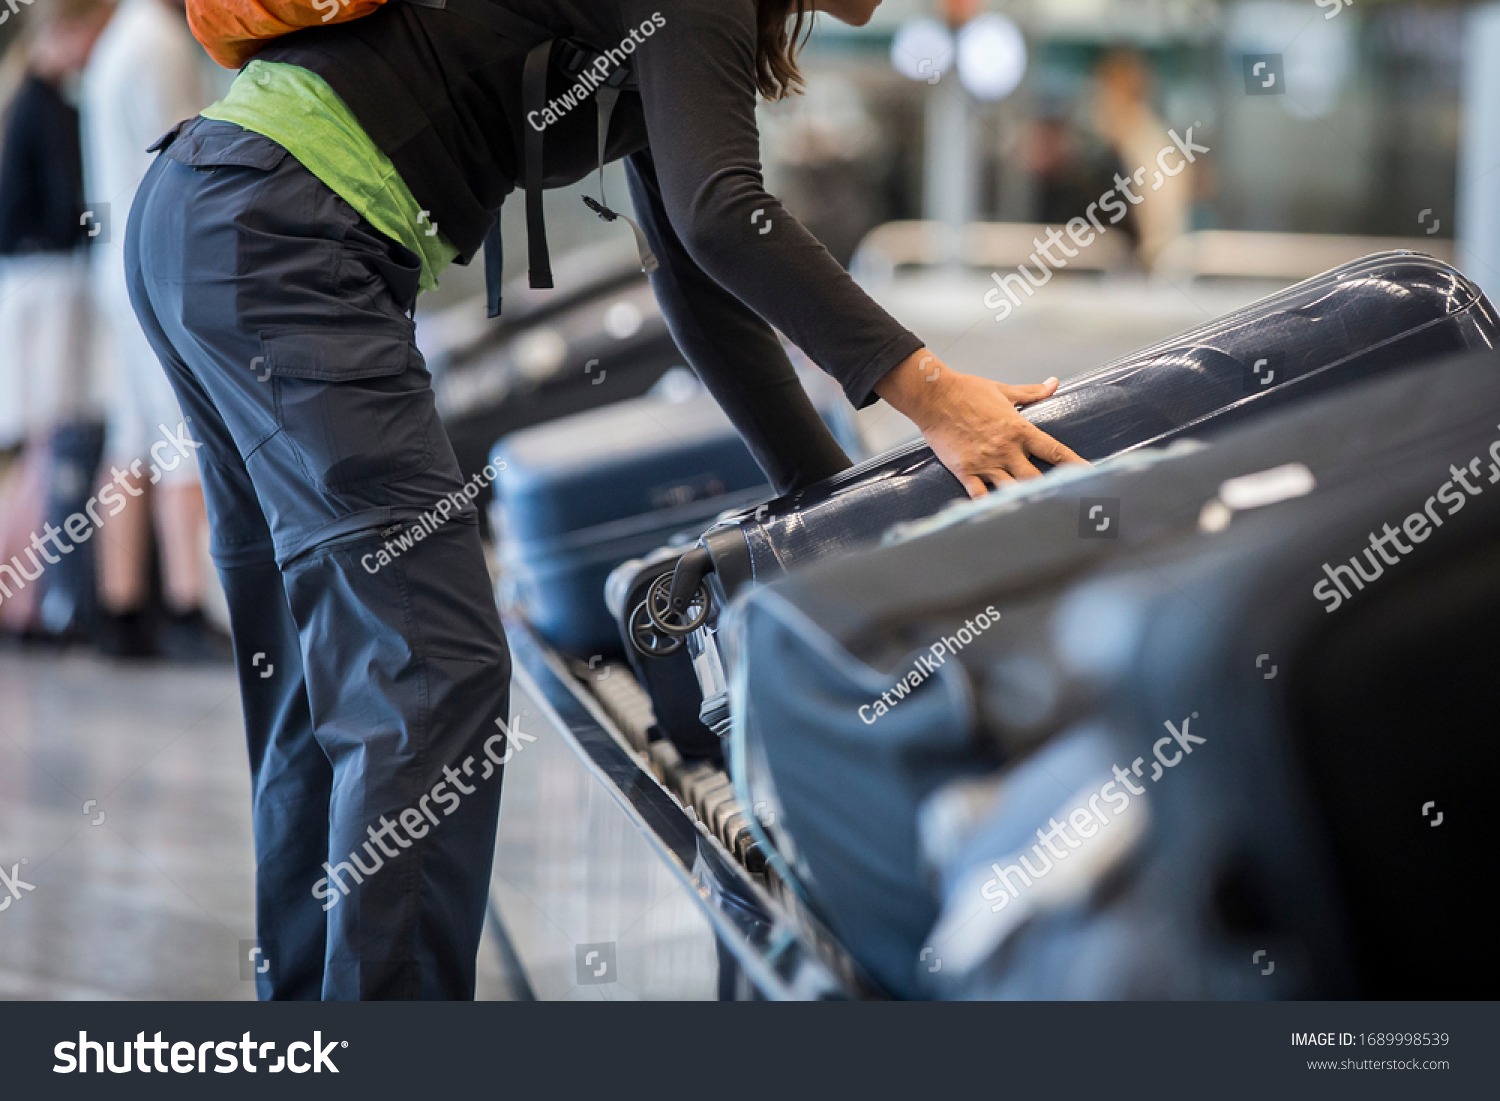 Stock Photo An Unidentified Woman Collecting A Wheeled Suitcase From A Luggage Belt At The Airport Terminal 1689998539 